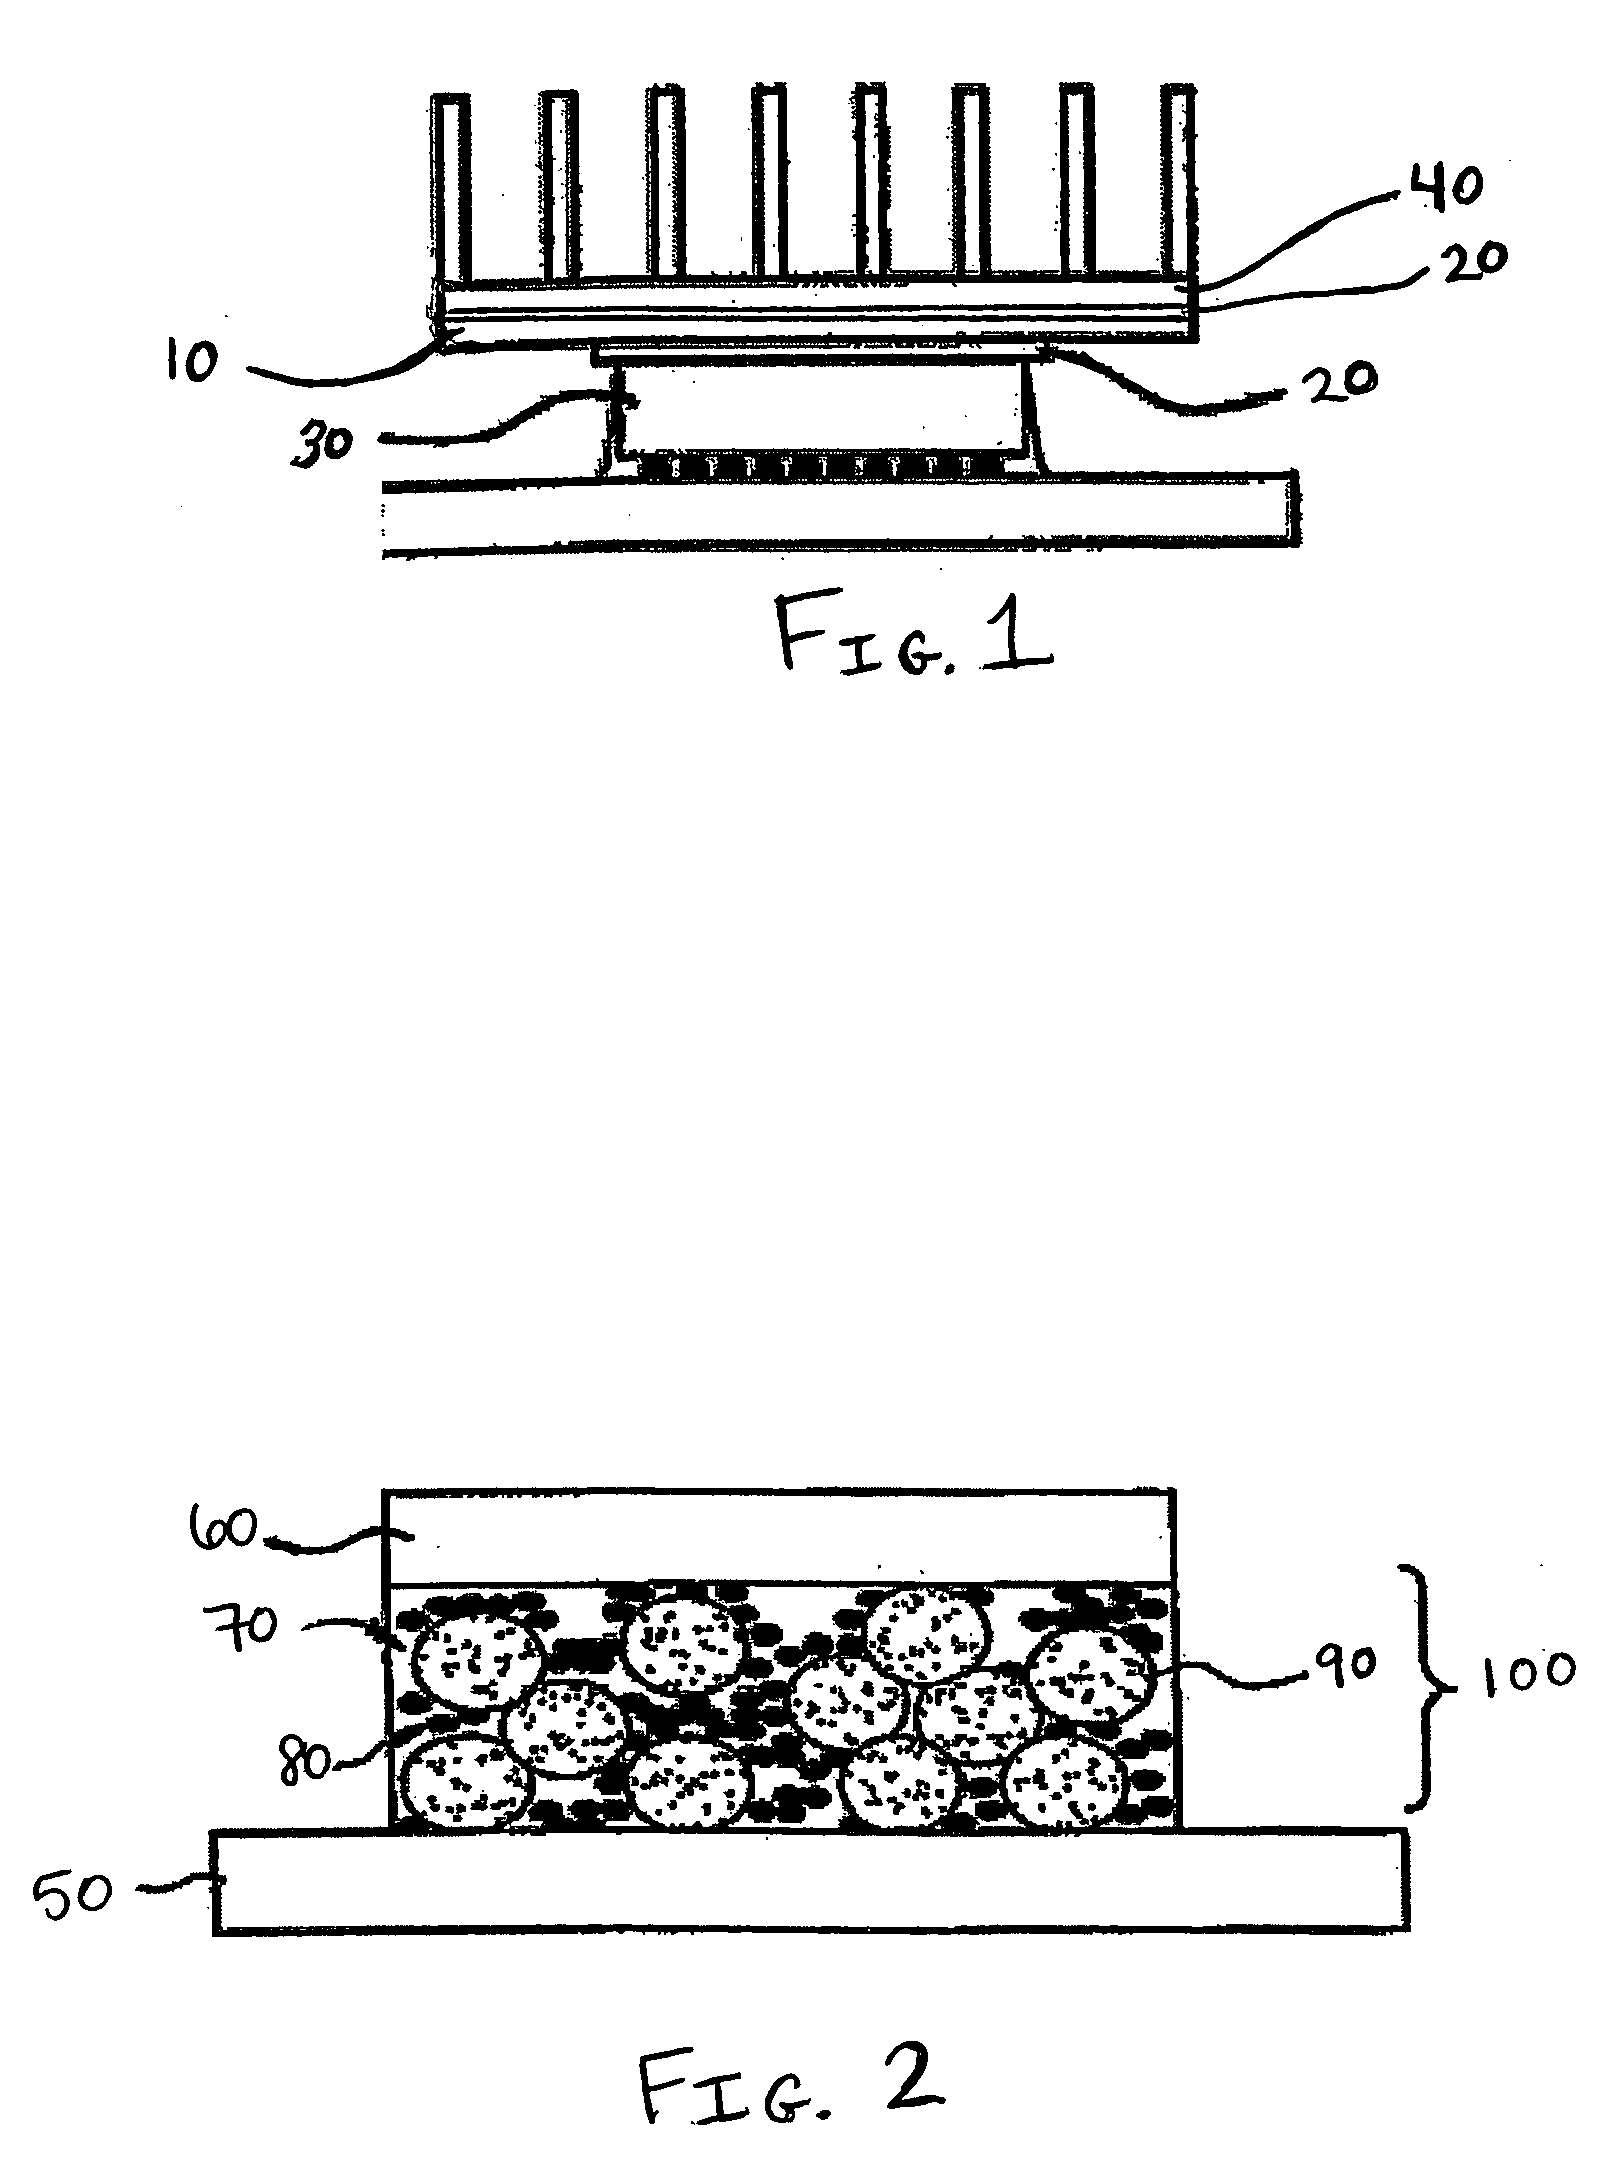 Thermally conductive compositions and methods of making thereof